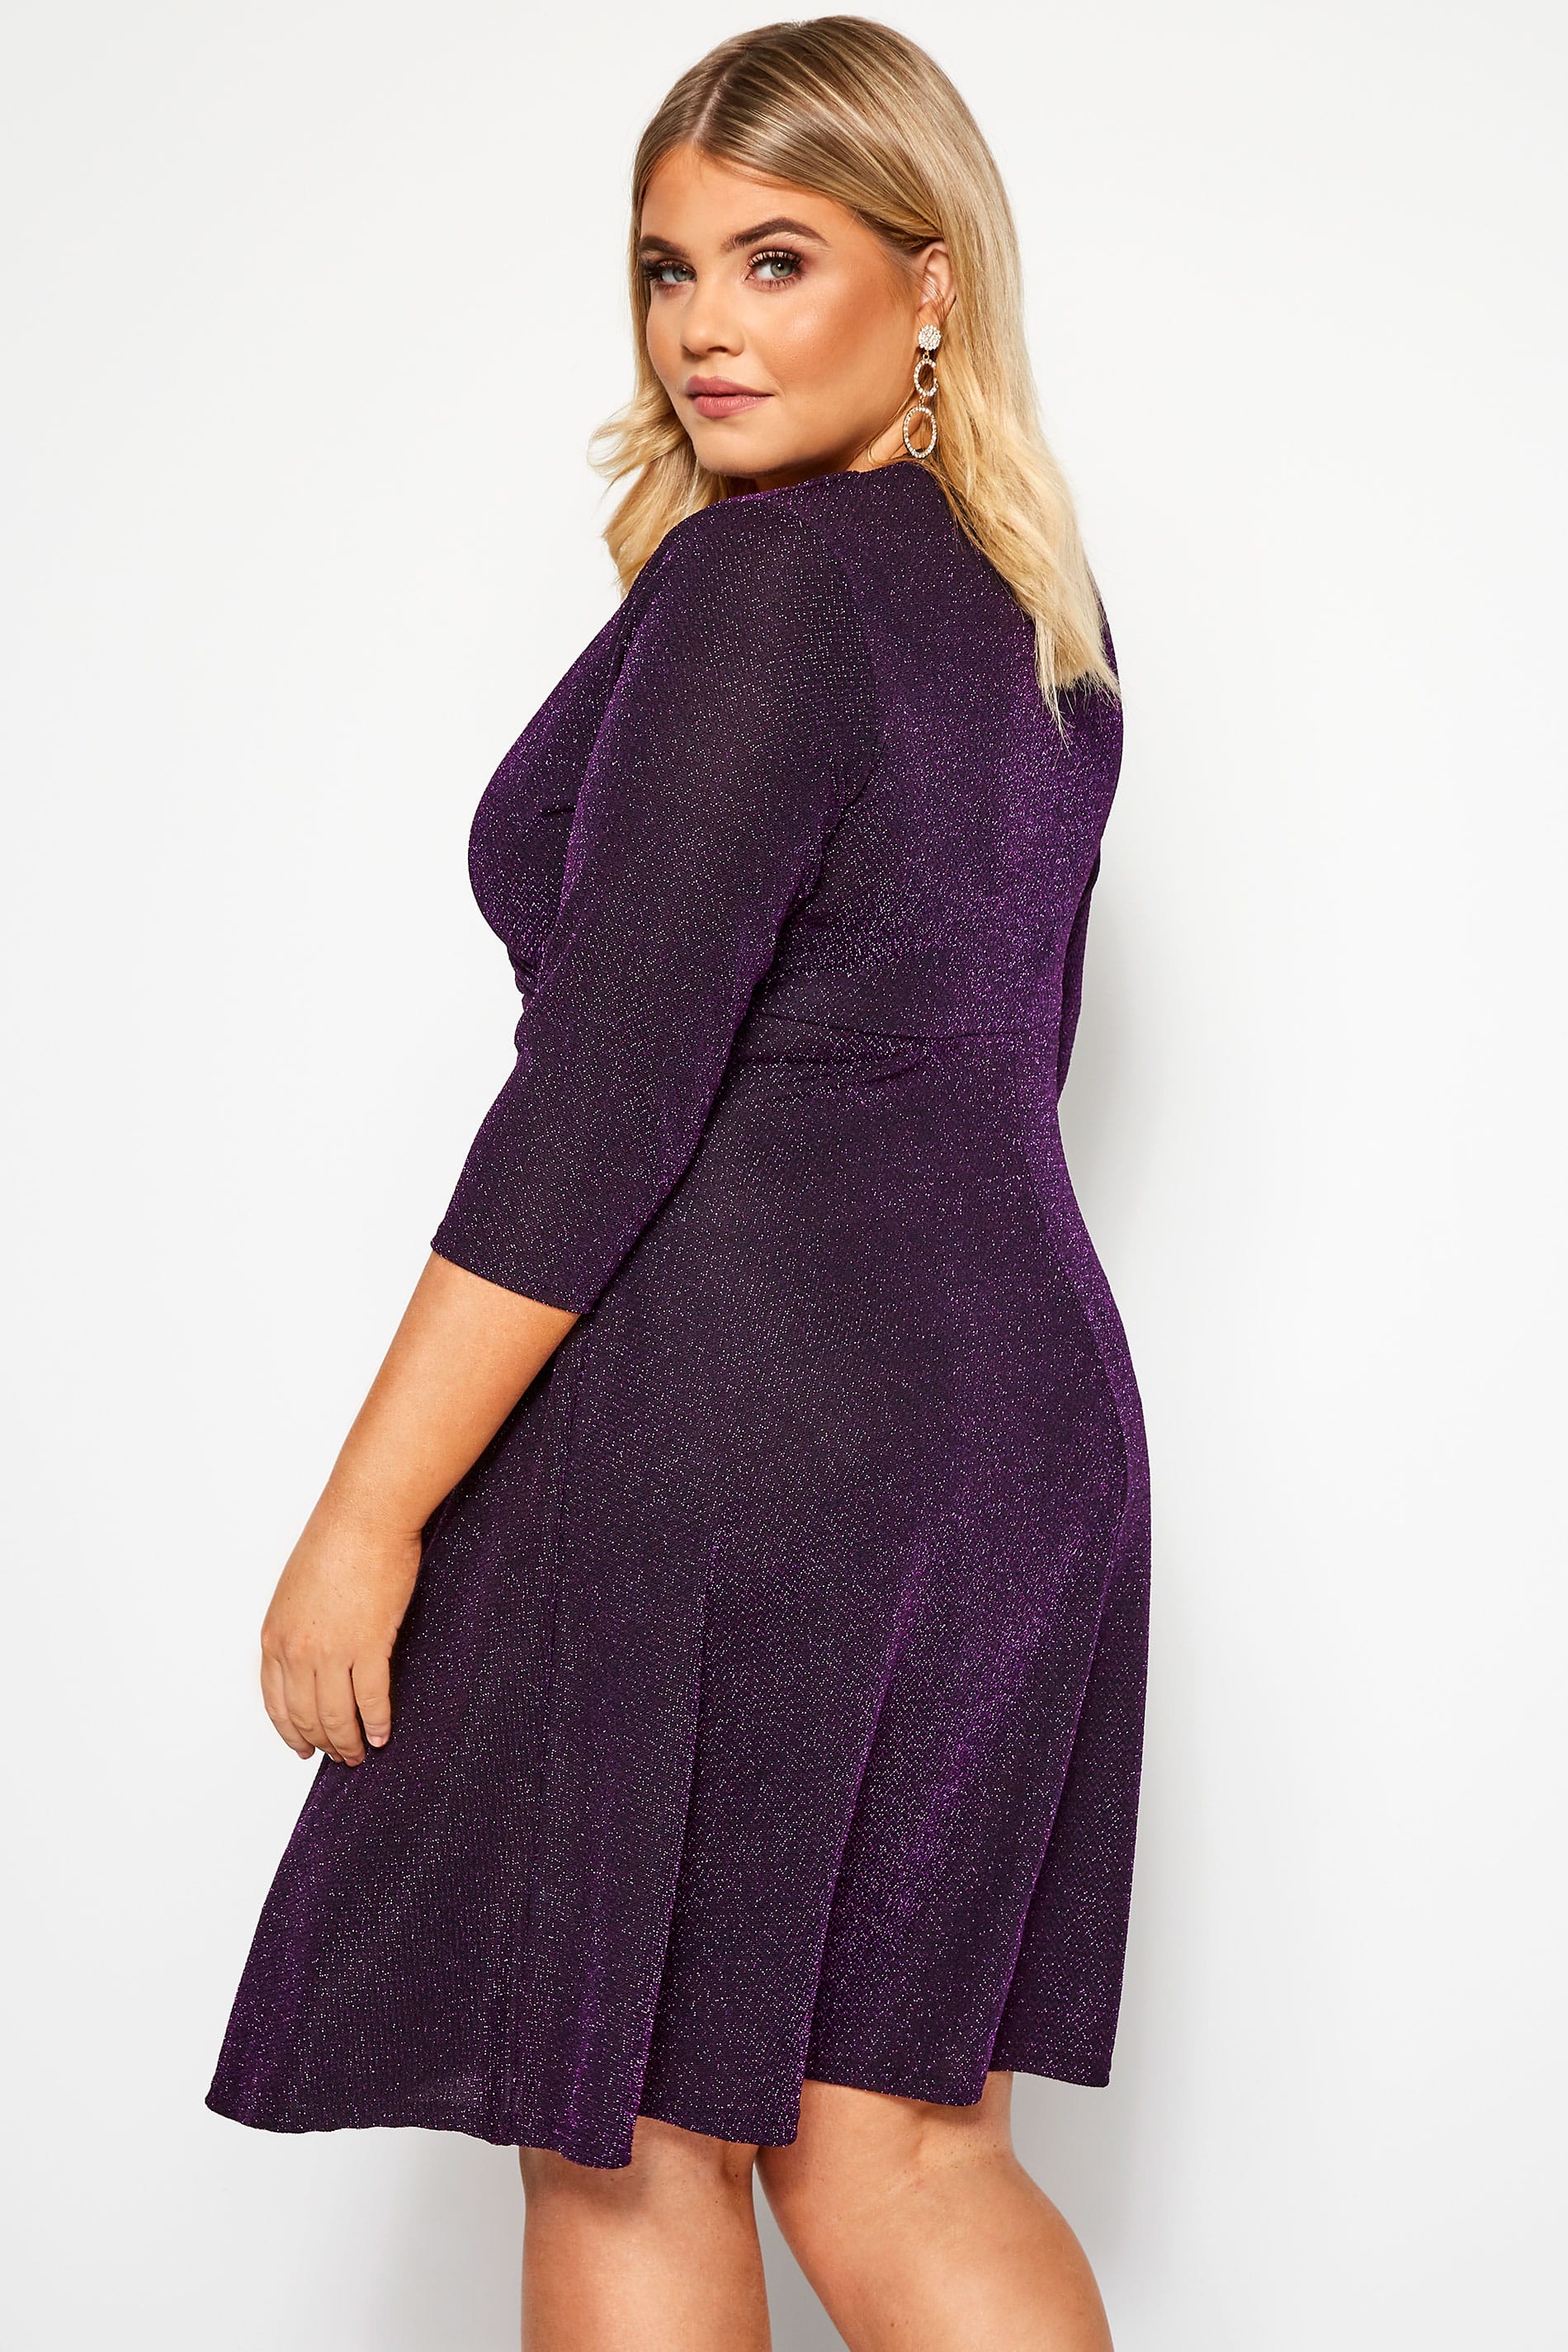 Purple Sparkle Skater Dress | Yours Clothing